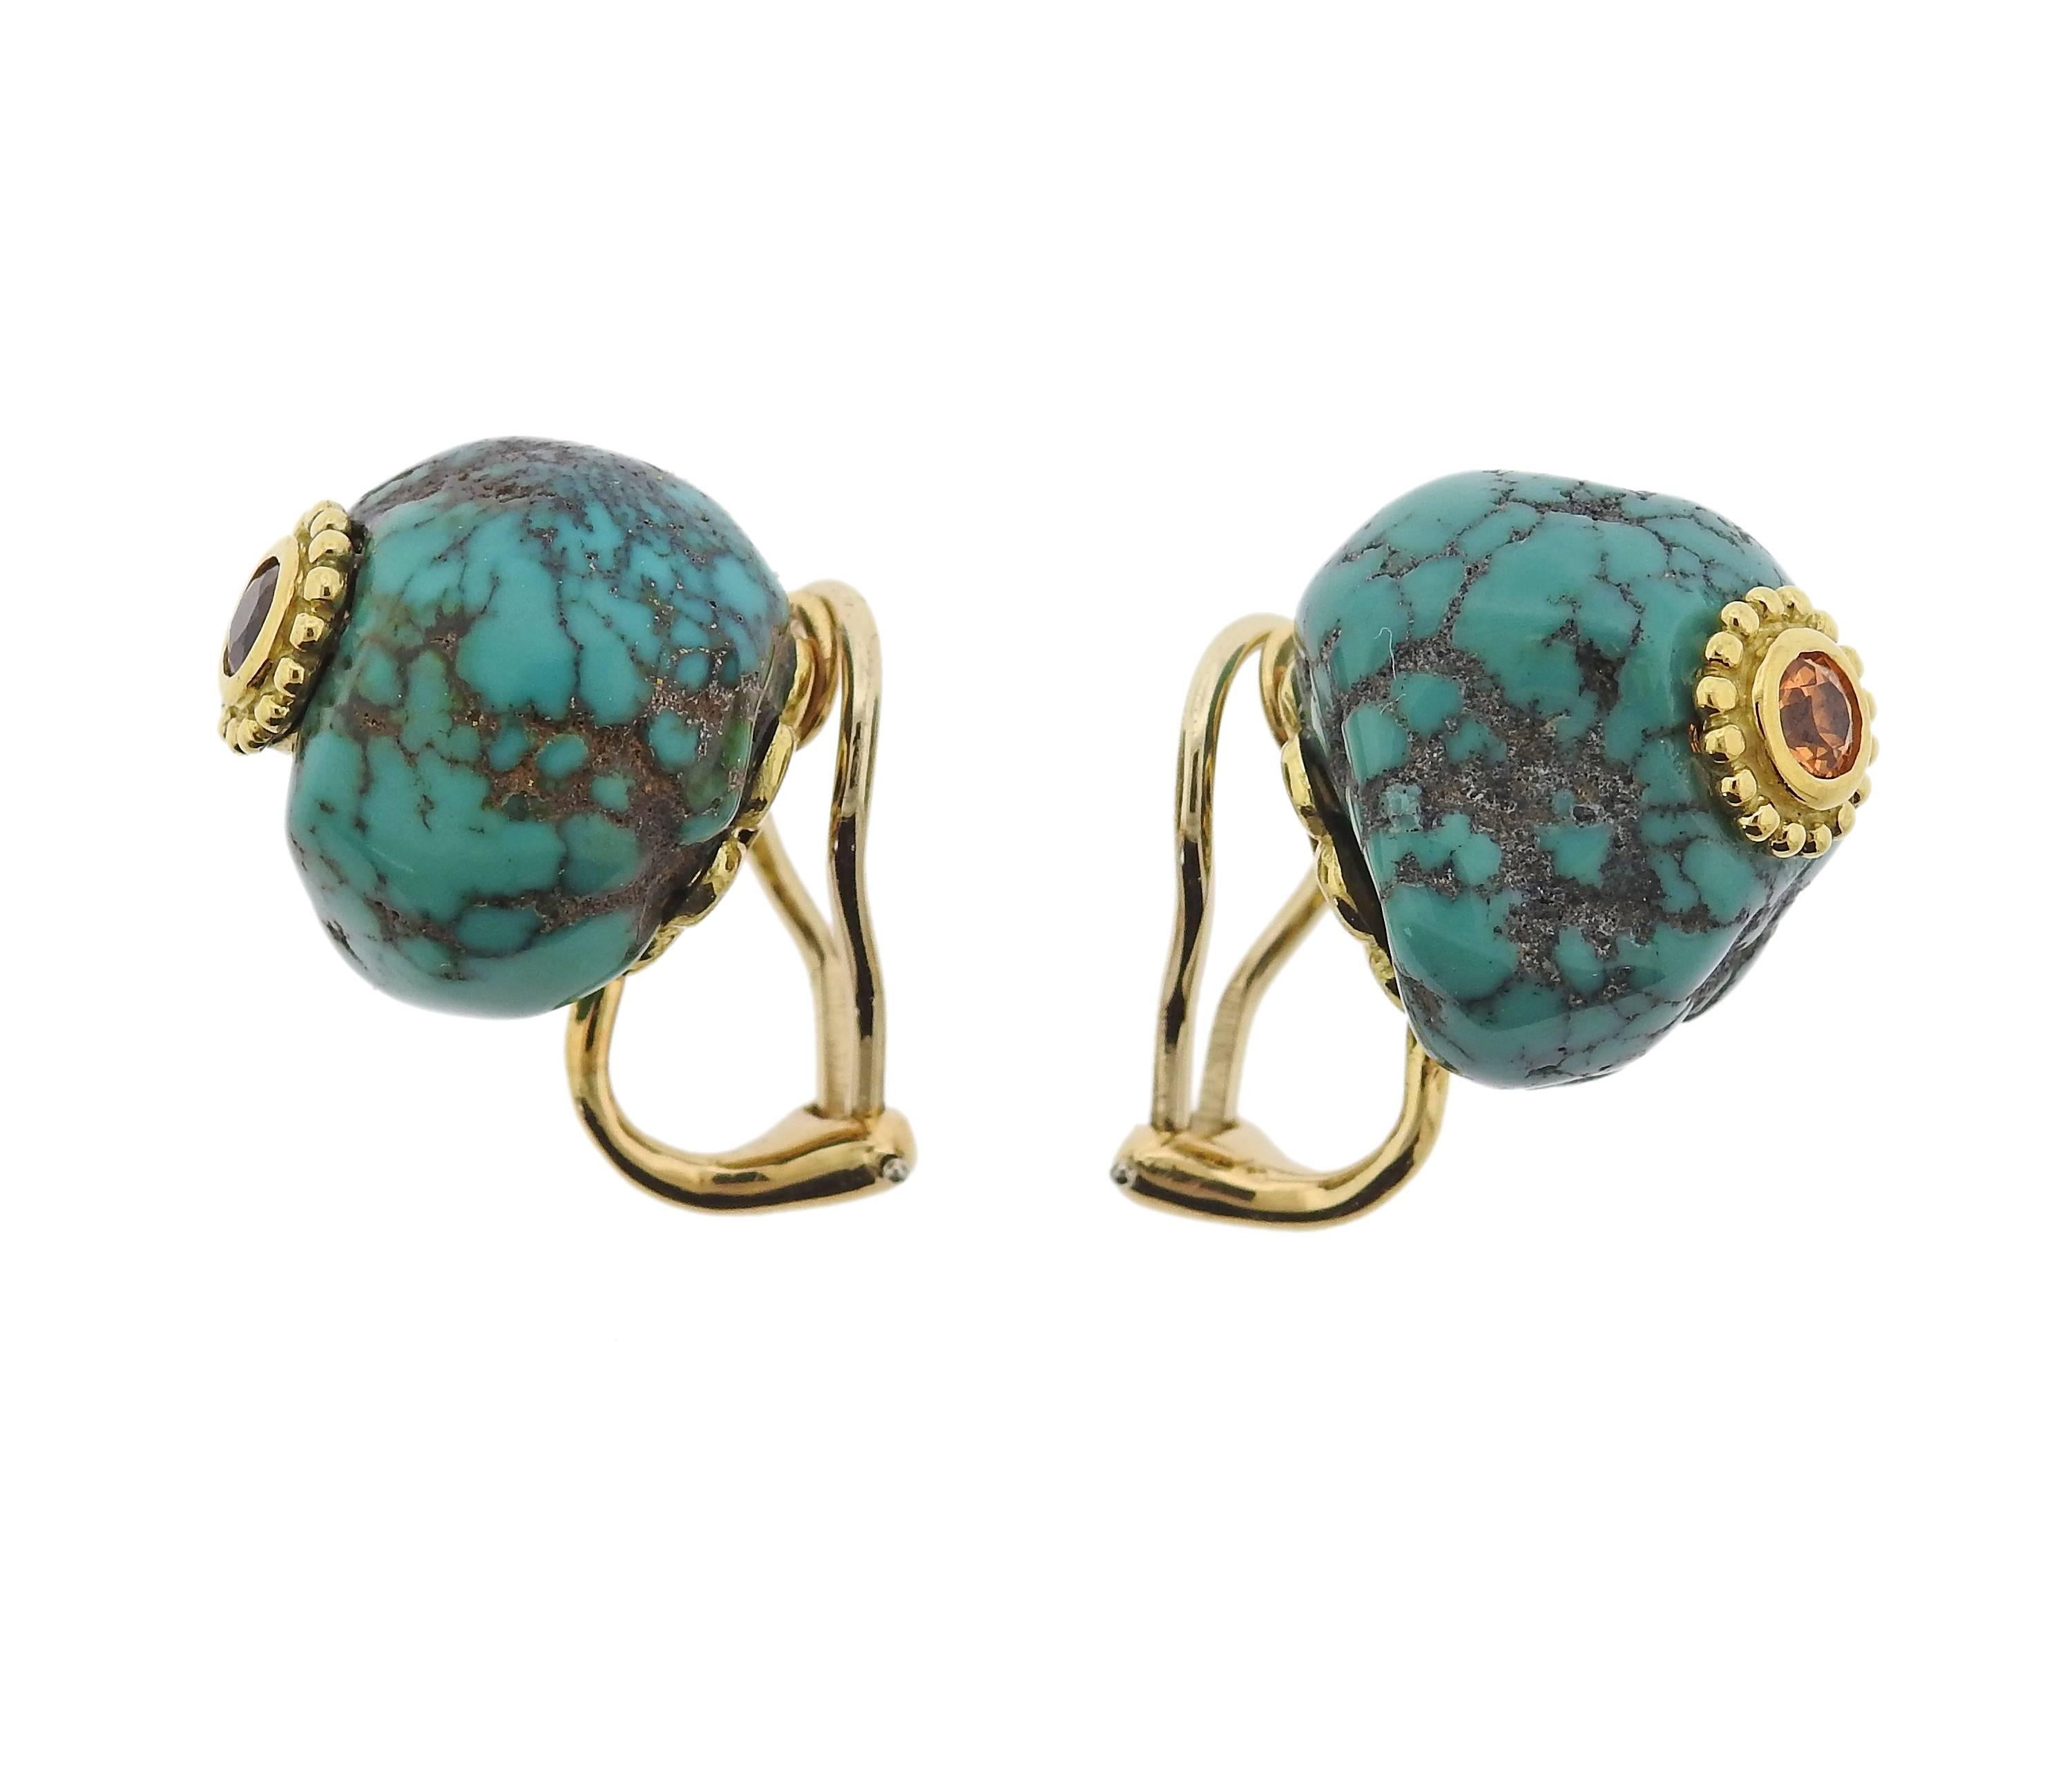 Pair of 18k gold earrings, featuring free form turquoise top with citrine in the center. Designed by Haume, earrings measure 19mm x 20mm. Marked: Haume 18k. Weight - 20.1 grams.